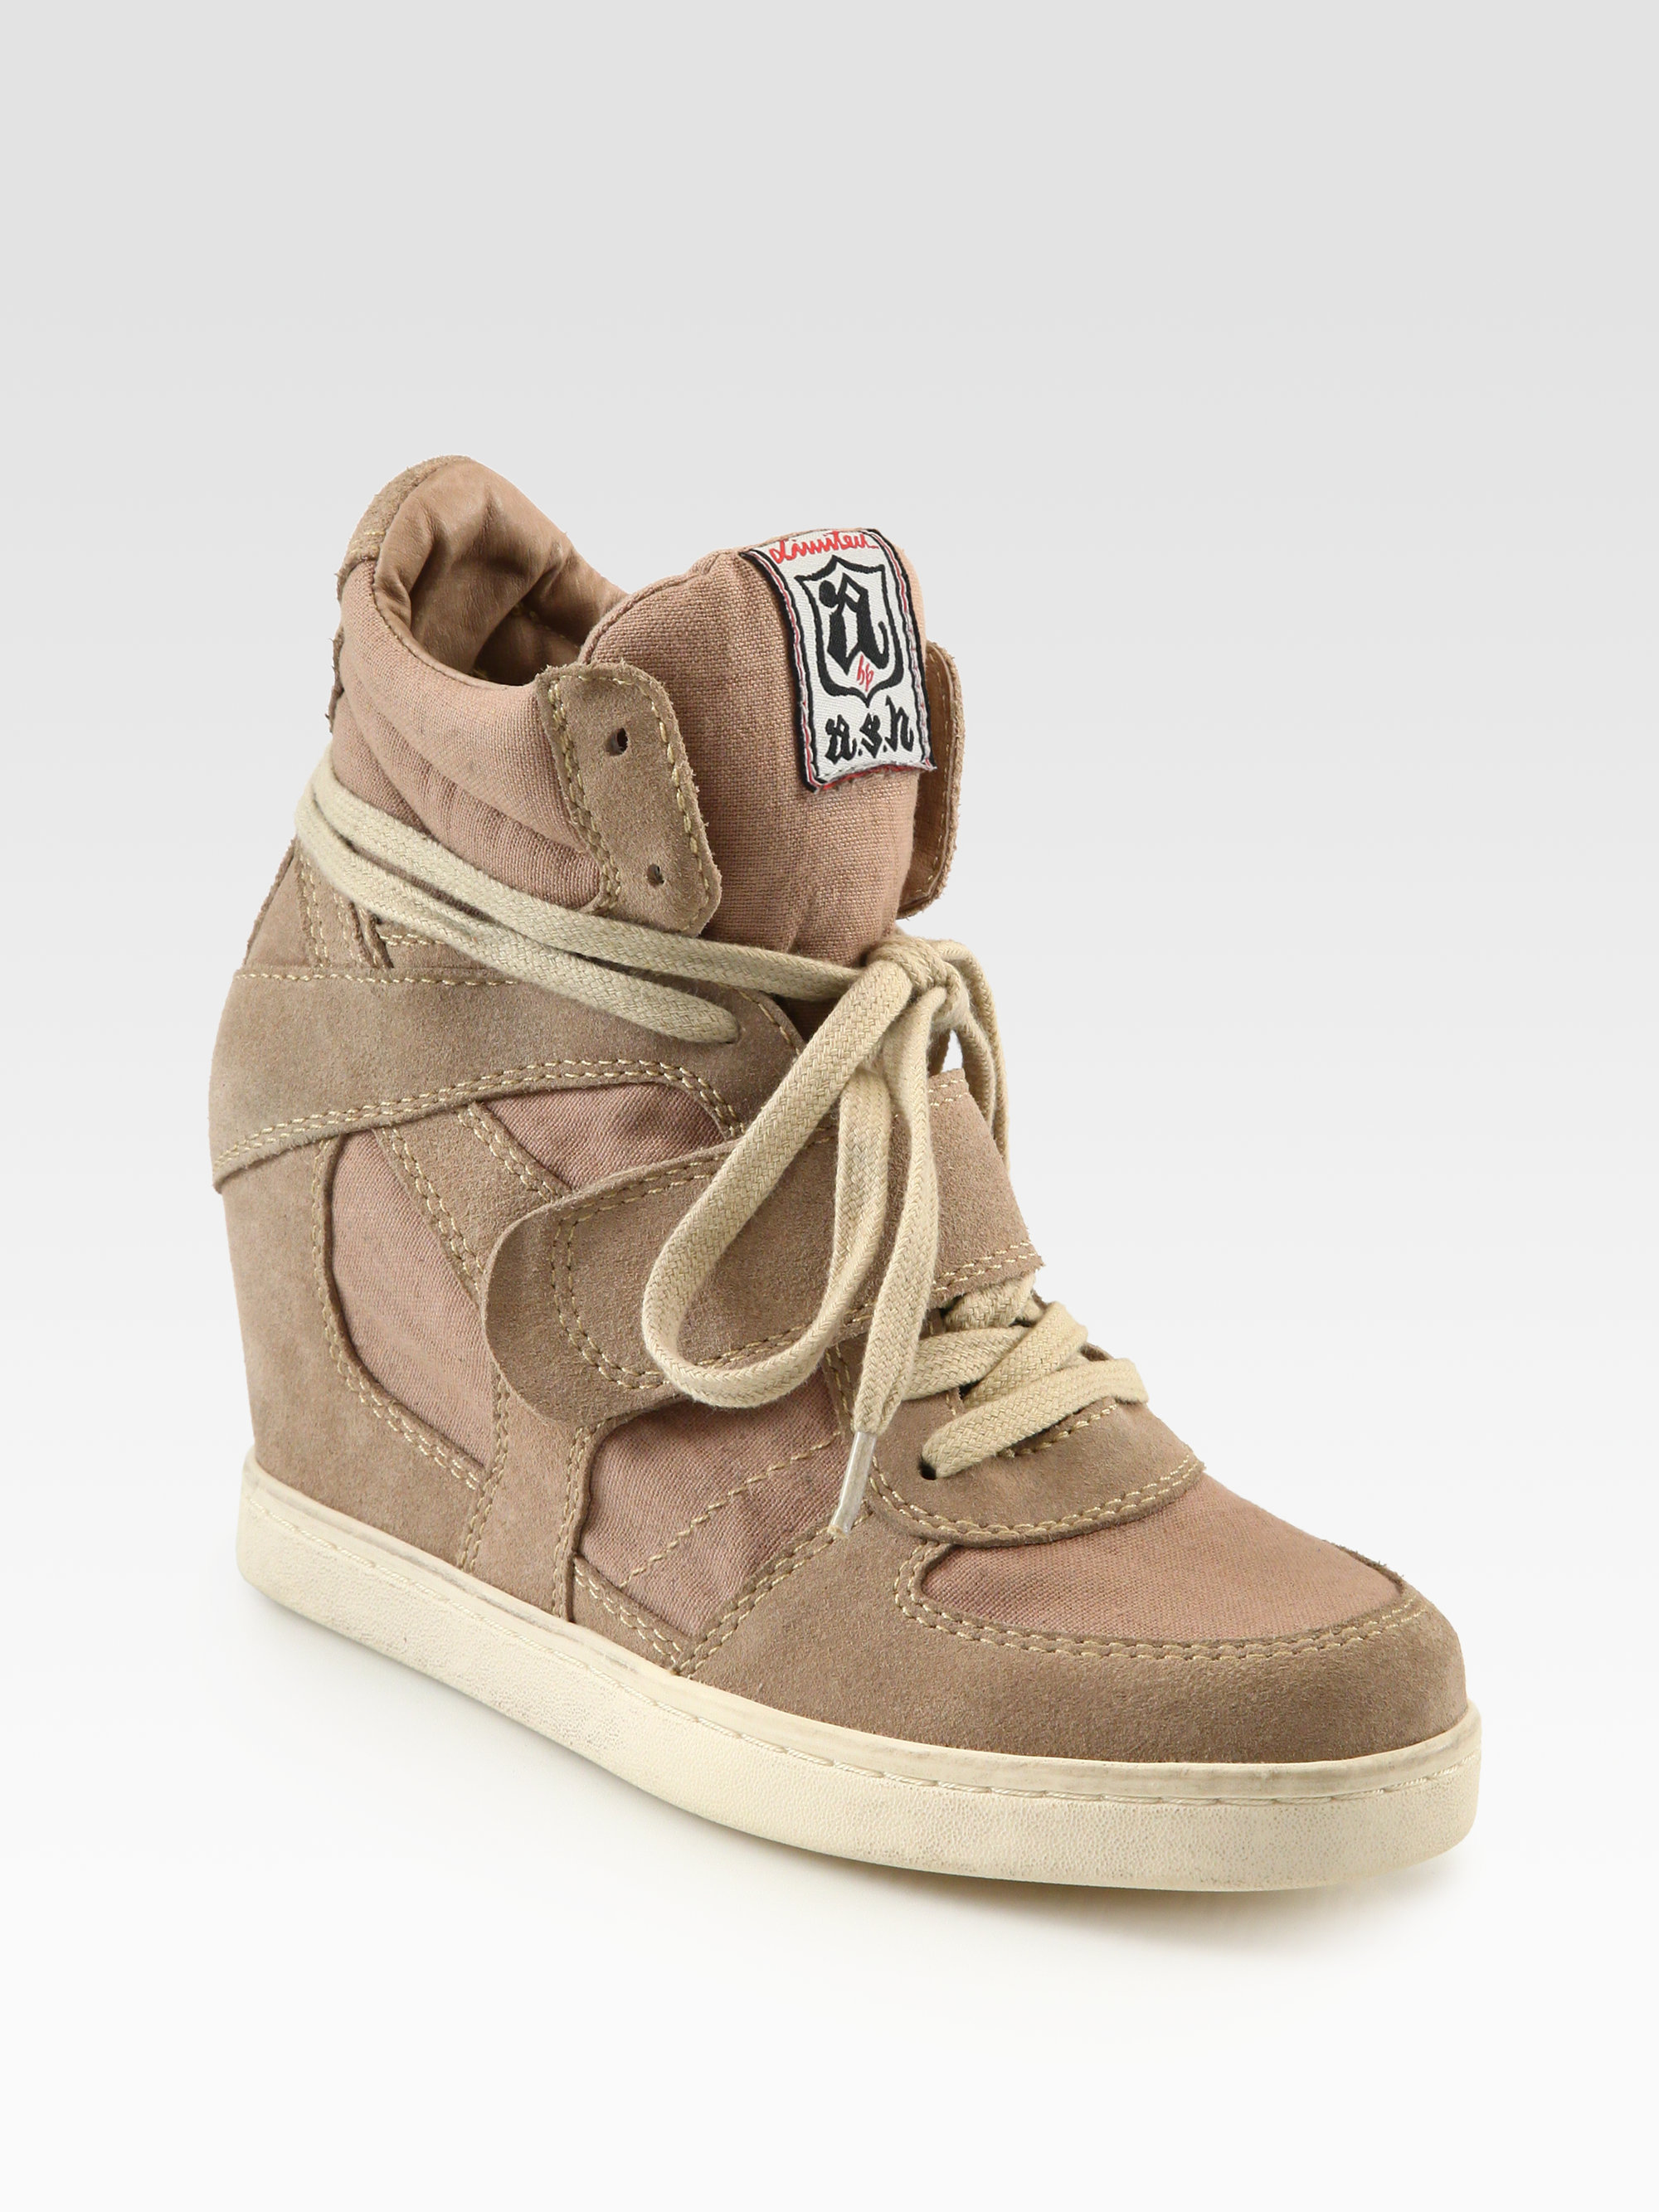 Ash Cool Canvas Suede Wedge Sneakers in Brown | Lyst